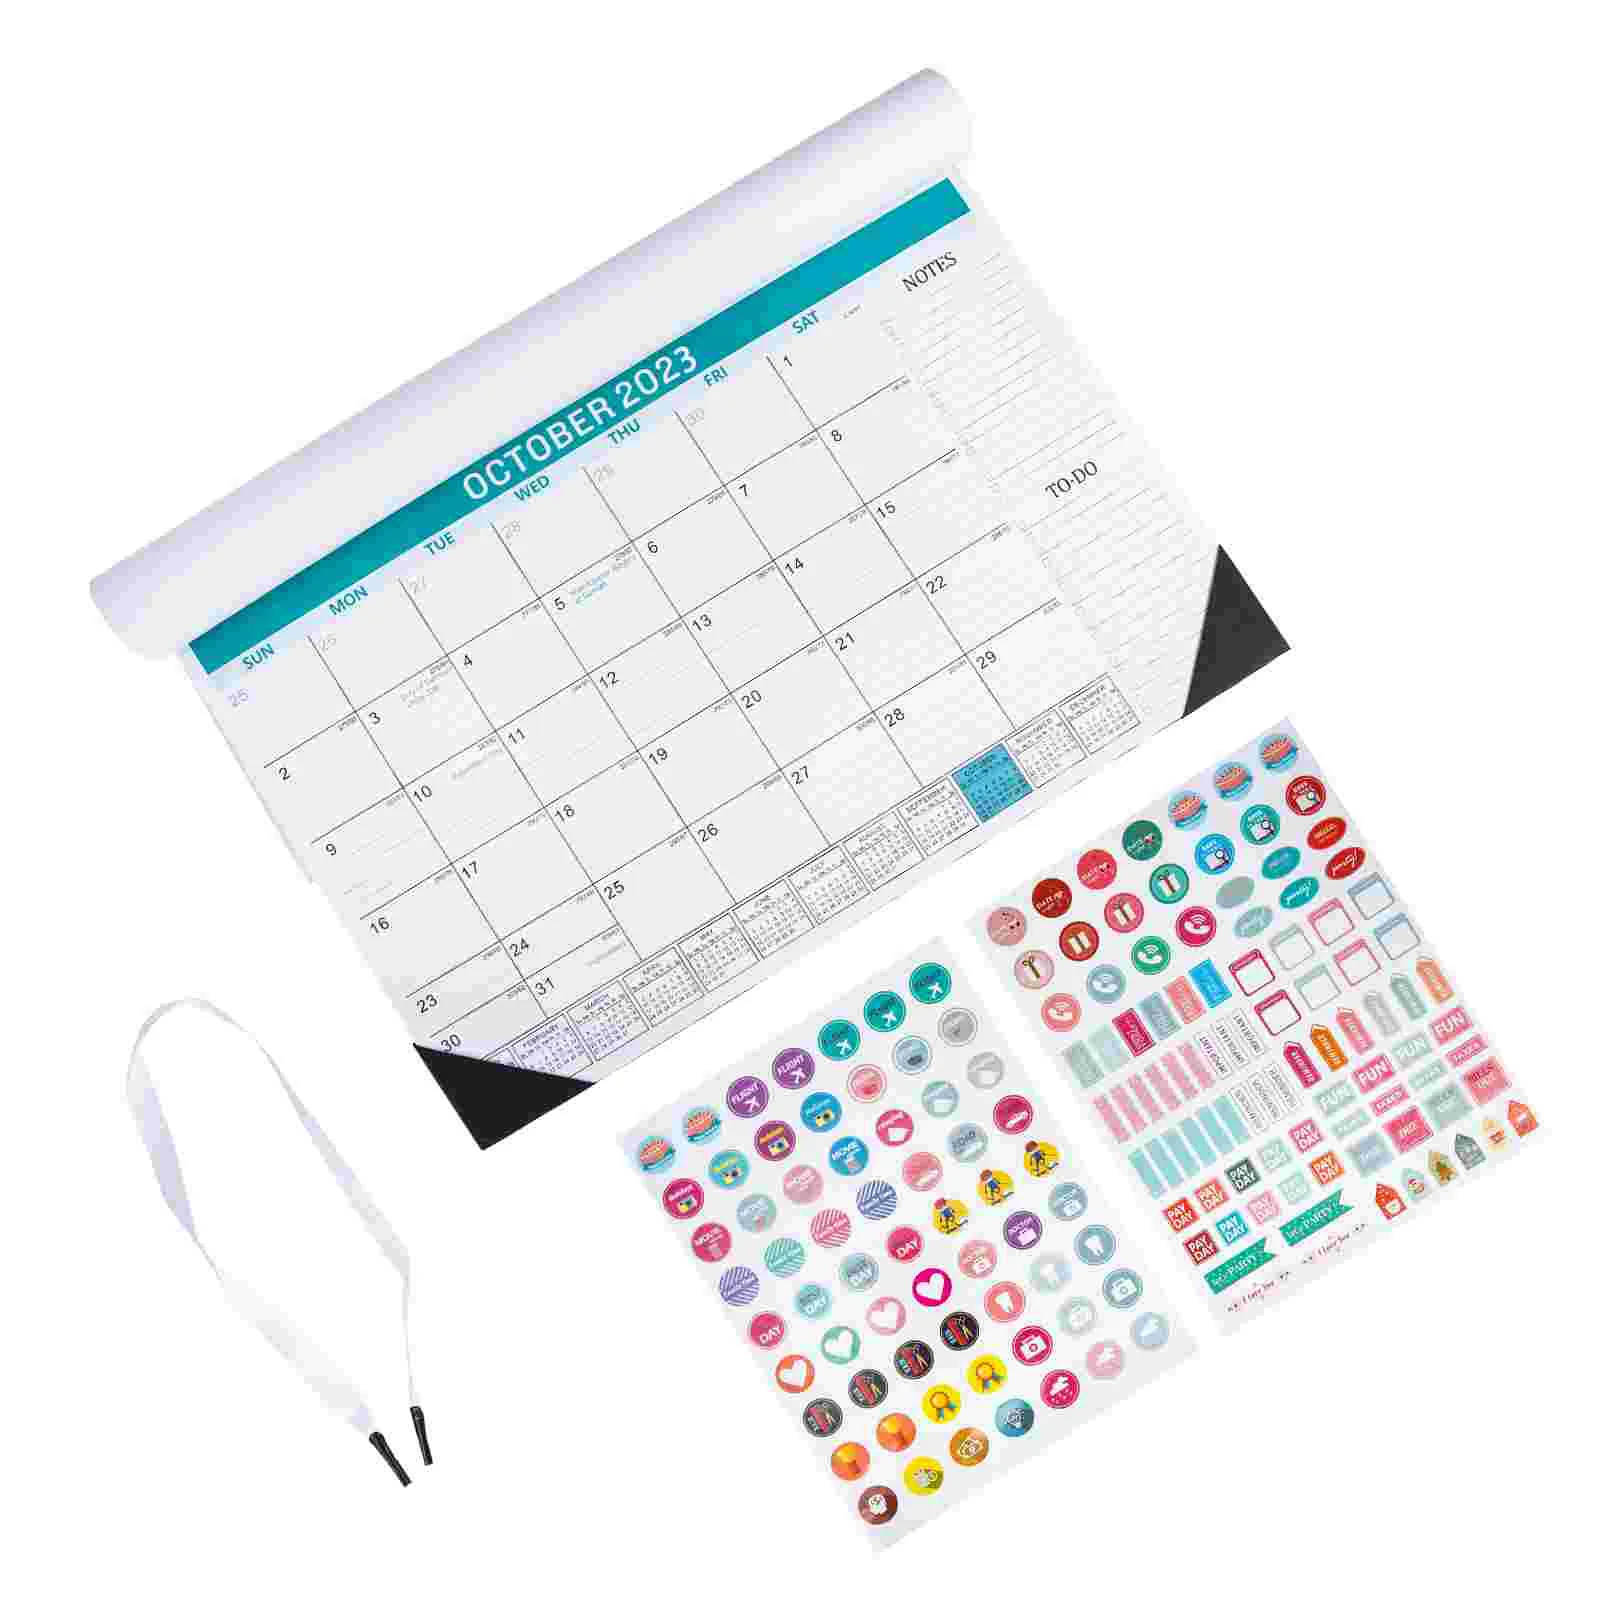 

Calendar Wall 2023 Planner Monthly Schedule Memo Hanging Office Agenda English Calendars Plan Month Poster Daily Yearly Flipping